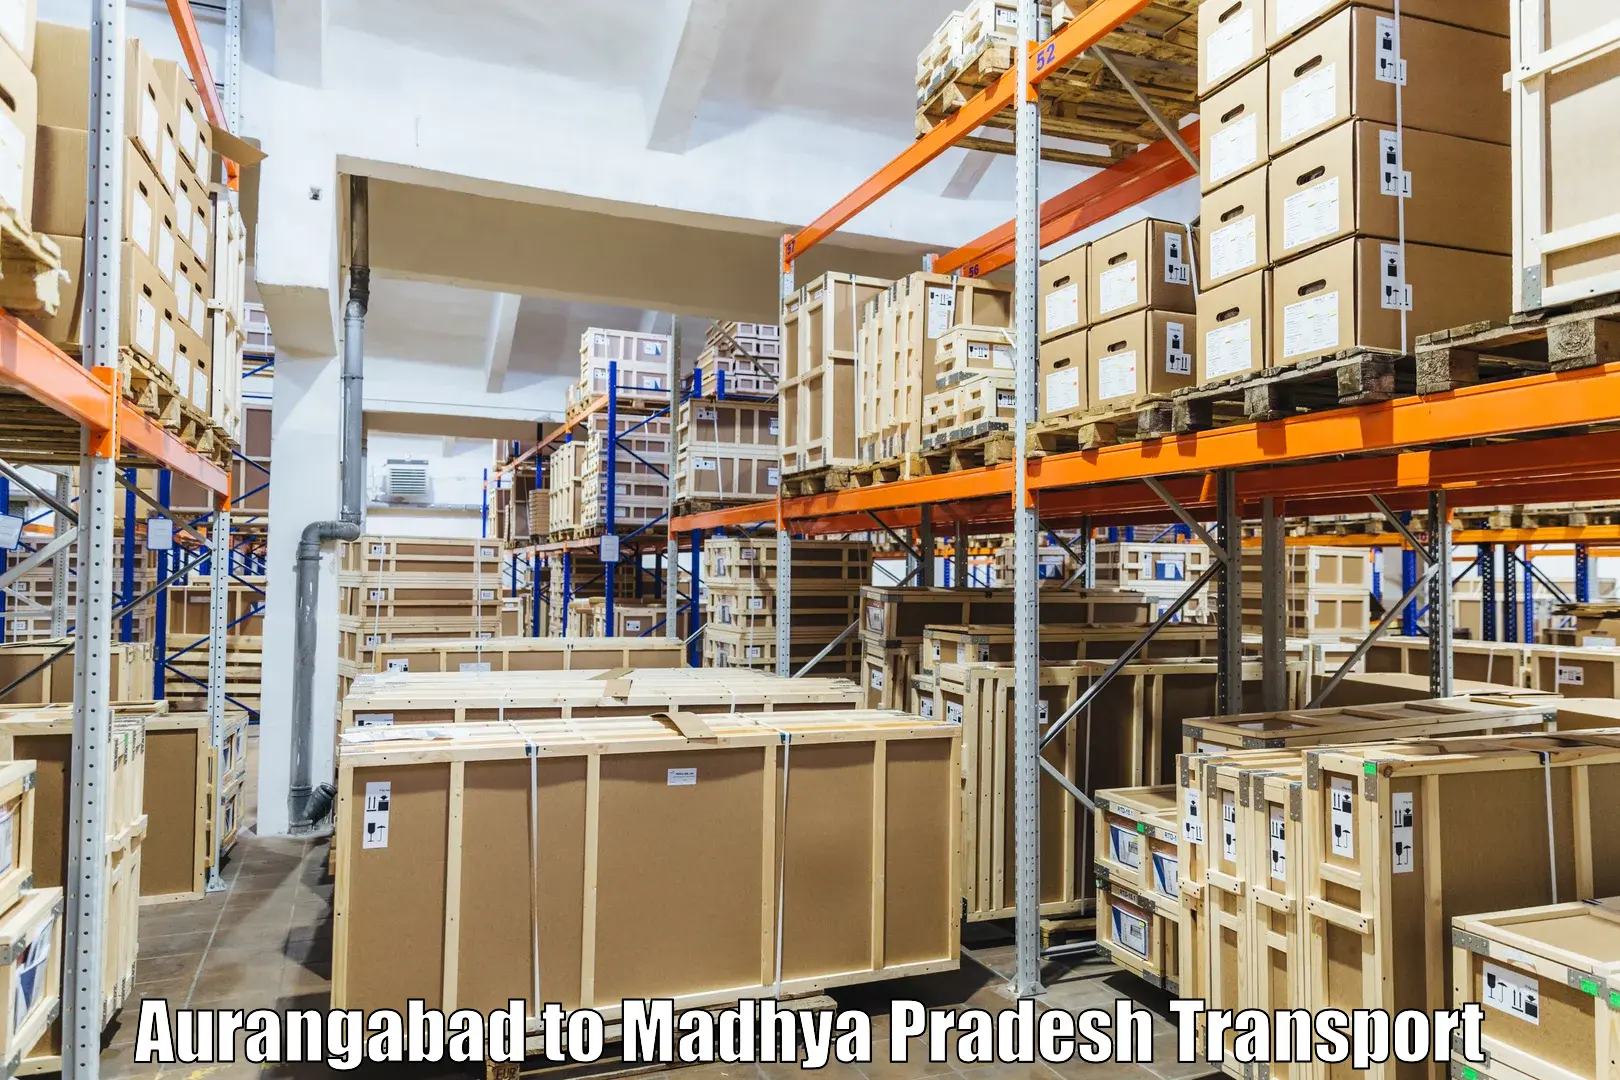 Air cargo transport services in Aurangabad to Pithampur